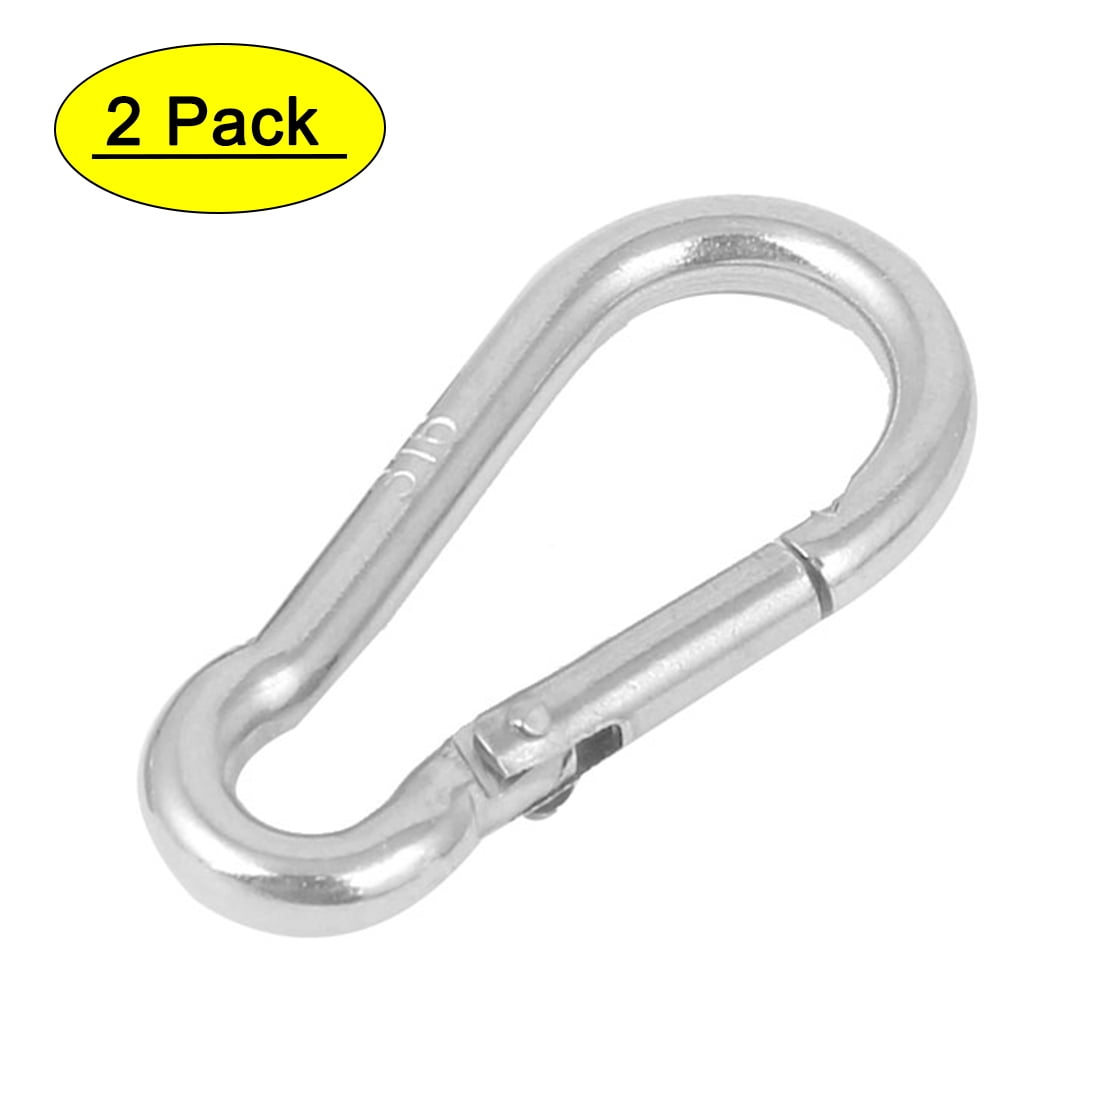 Unique Bargains 304 Stainless Steel Spring Snap Hook Carabiner Silver Tone  2Pcs 